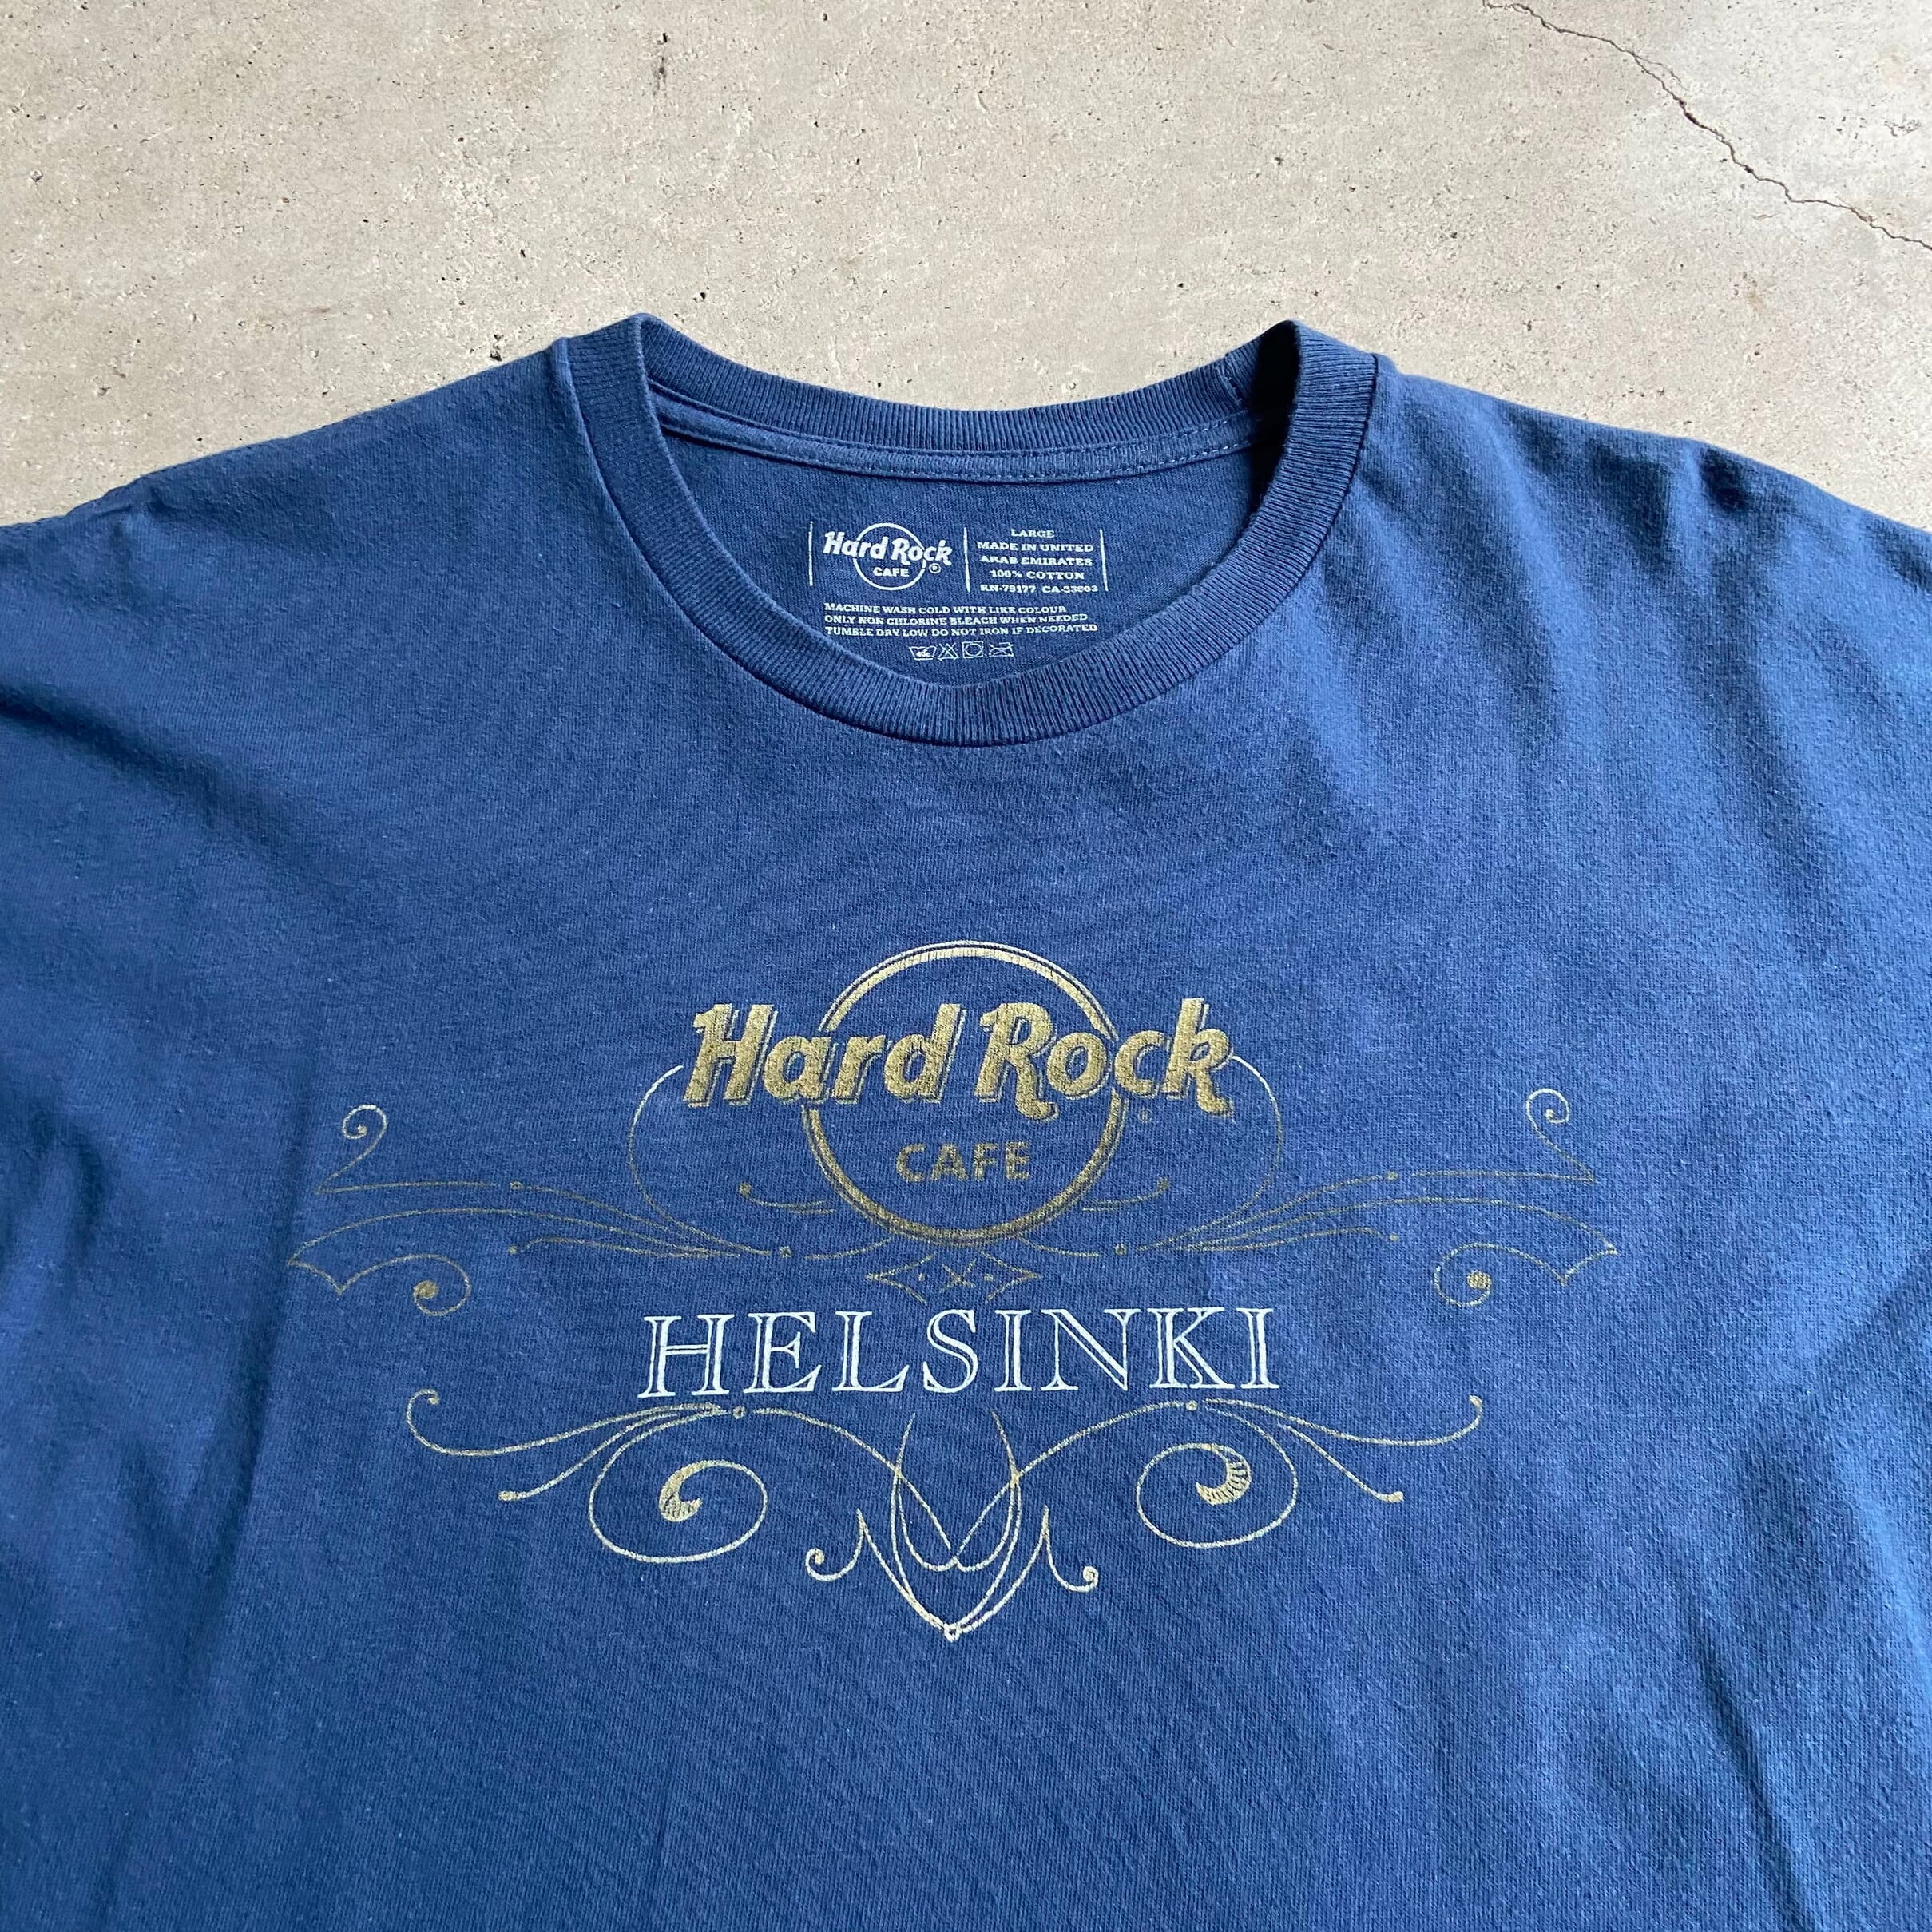 HARD ROCK CAFE ハードロックカフェ アドバタイジング 企業系 両面プリントTシャツ メンズL 古着 ネイビー 紺  【Tシャツ】【PD20】【AN20】 | cave 古着屋【公式】古着通販サイト